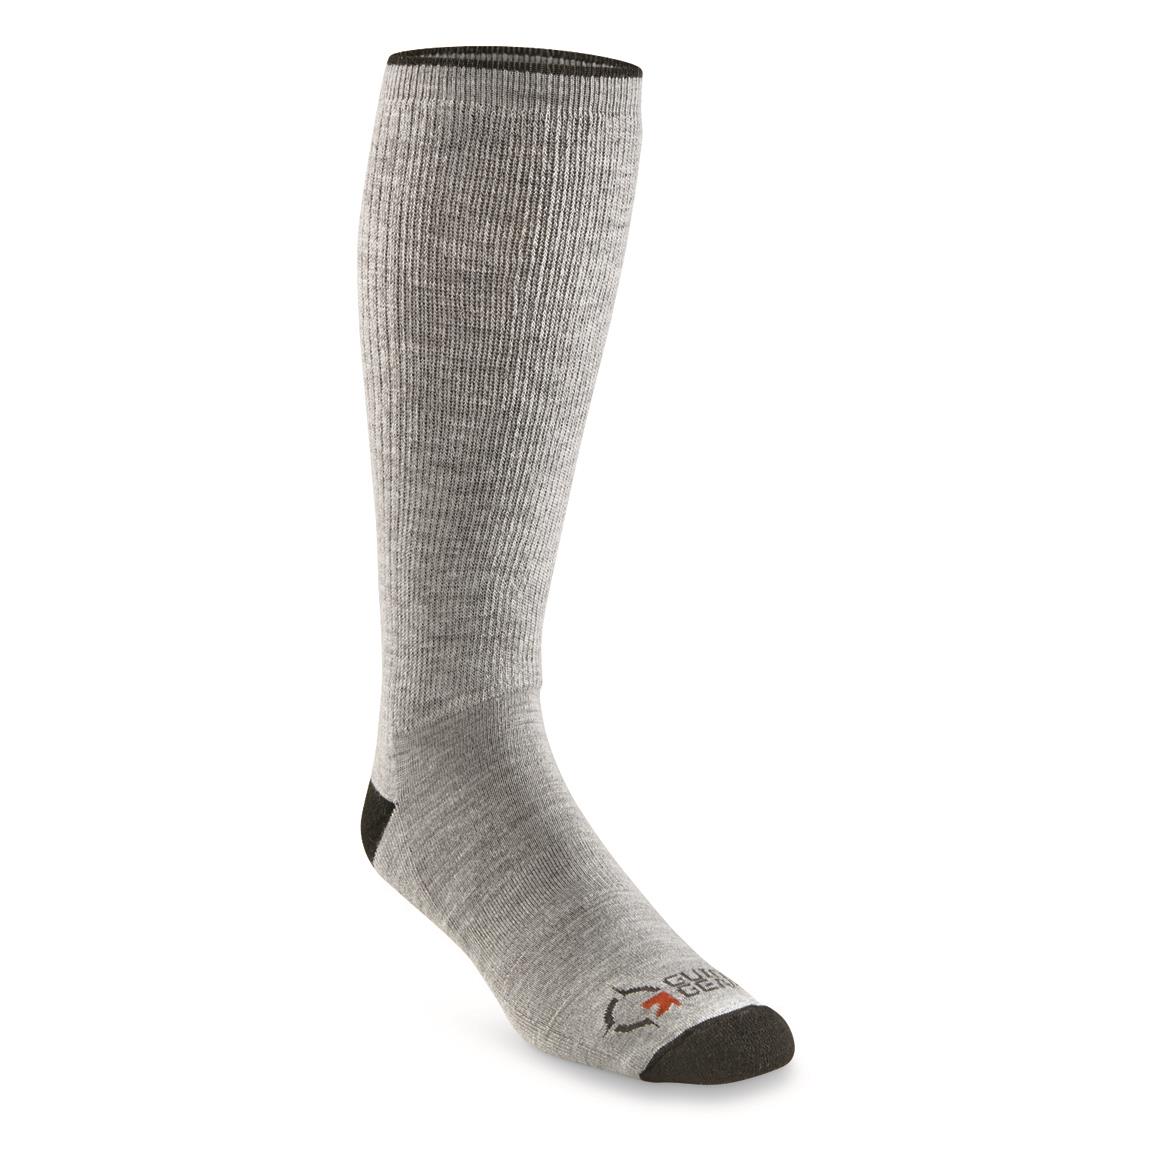 Men's Guide Gear Merino Wool Blend Midweight Boots Socks, 3 Pairs, Gray Heather